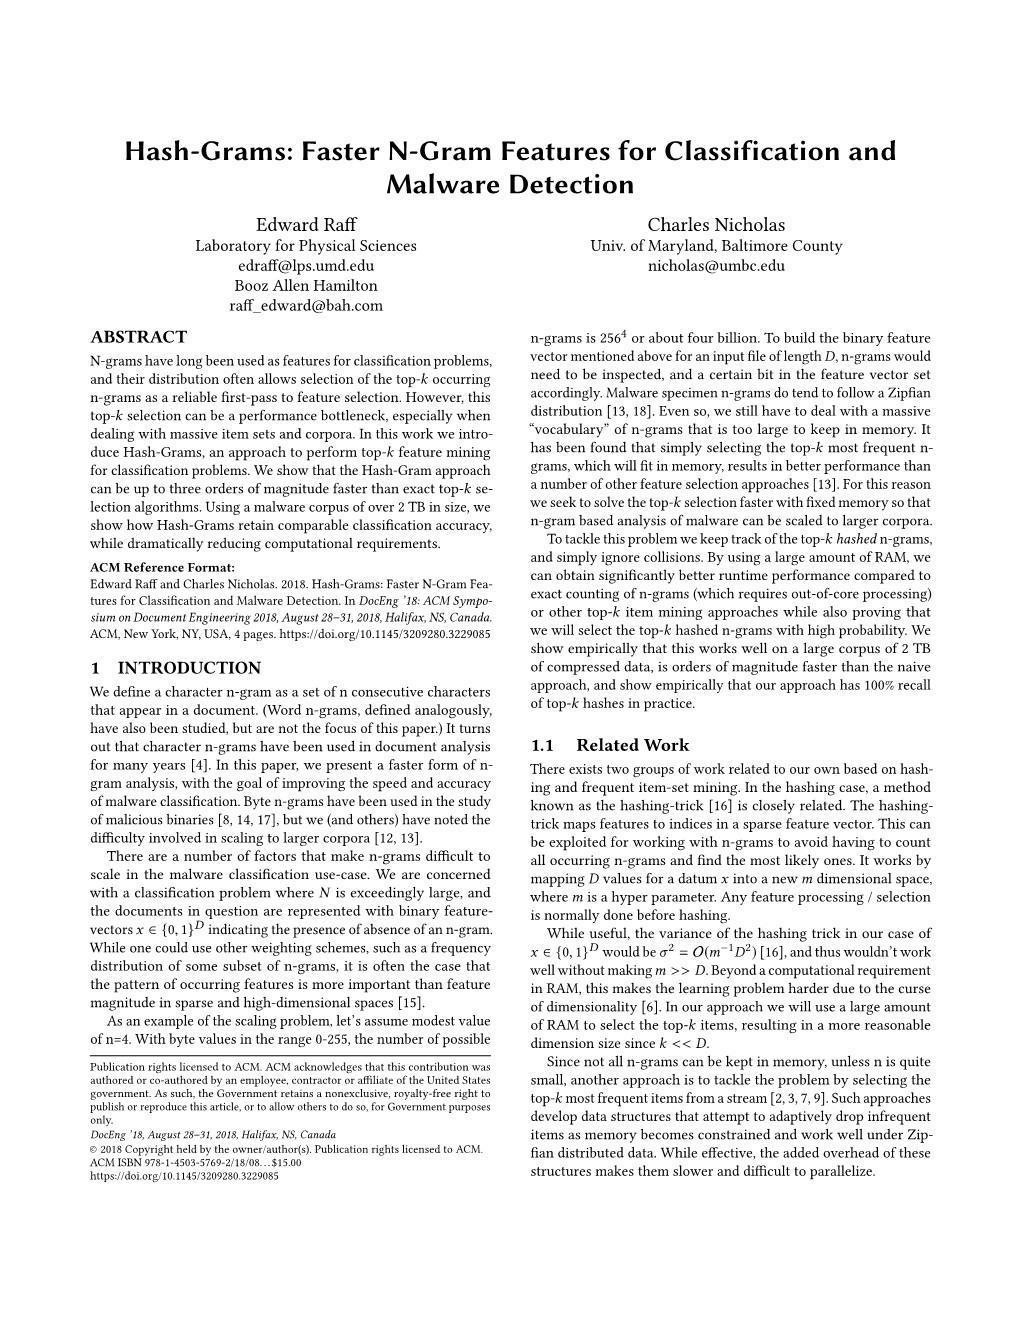 Hash-Grams: Faster N-Gram Features for Classification and Malware Detection Edward Raff Charles Nicholas Laboratory for Physical Sciences Univ